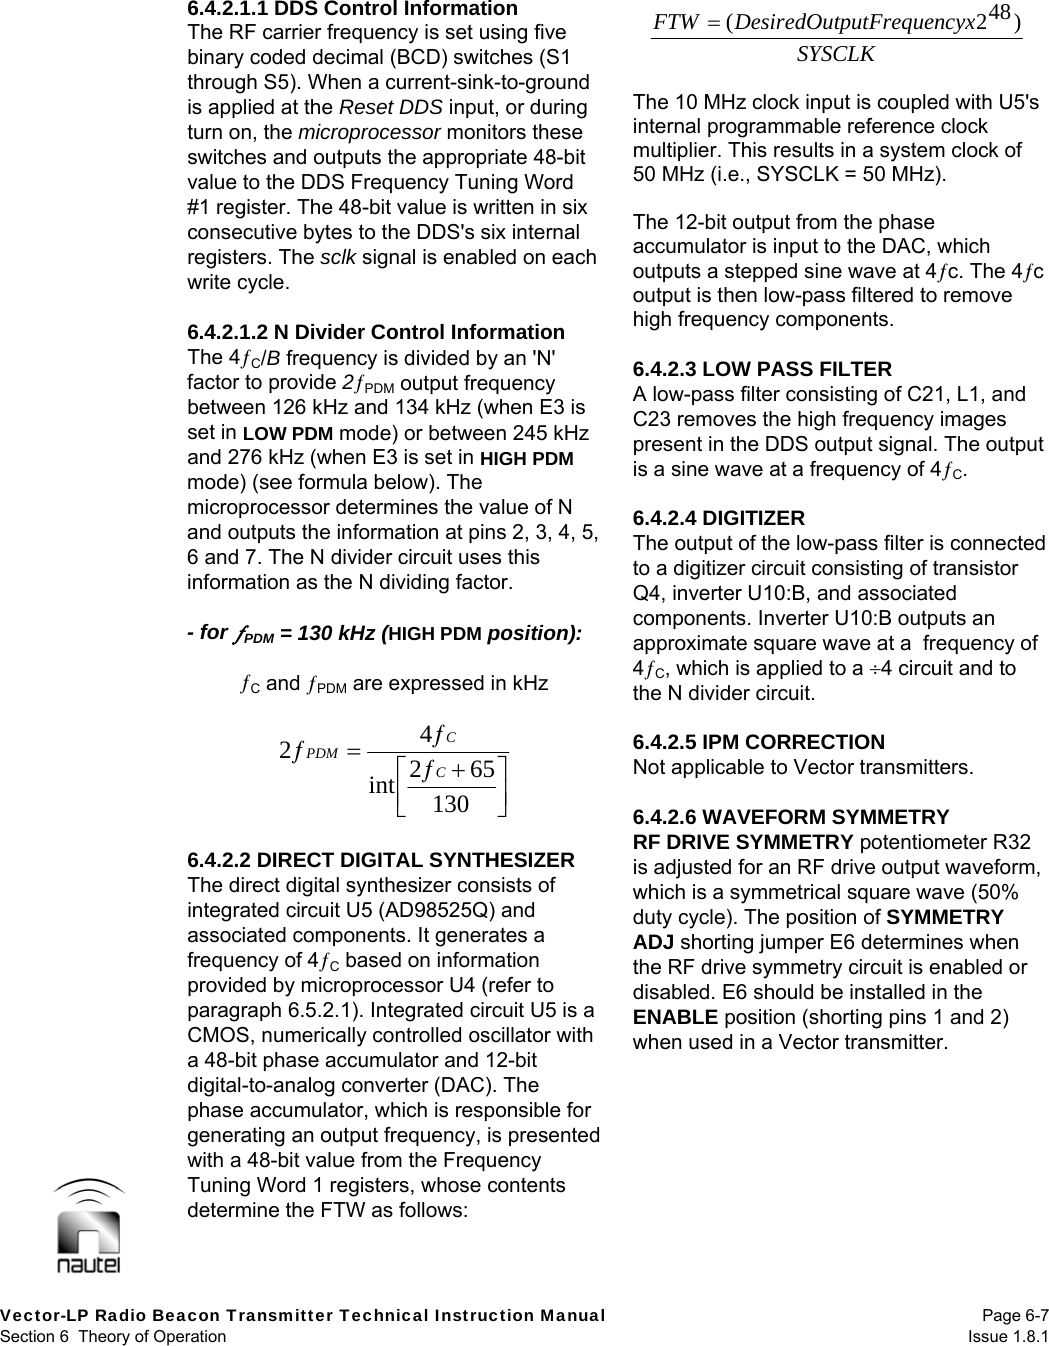  Vector-LP Radio Beacon Transmitter Technical Instruction Manual Page 6-7 Section 6  Theory of Operation  Issue 1.8.1 6.4.2.1.1 DDS Control Information The RF carrier frequency is set using five binary coded decimal (BCD) switches (S1 through S5). When a current-sink-to-ground is applied at the Reset DDS input, or during turn on, the microprocessor monitors these switches and outputs the appropriate 48-bit value to the DDS Frequency Tuning Word #1 register. The 48-bit value is written in six consecutive bytes to the DDS&apos;s six internal registers. The sclk signal is enabled on each write cycle.  6.4.2.1.2 N Divider Control Information The 4C/B frequency is divided by an &apos;N&apos; factor to provide 2PDM output frequency between 126 kHz and 134 kHz (when E3 is set in LOW PDM mode) or between 245 kHz and 276 kHz (when E3 is set in HIGH PDM mode) (see formula below). The microprocessor determines the value of N and outputs the information at pins 2, 3, 4, 5, 6 and 7. The N divider circuit uses this information as the N dividing factor.  - for PDM = 130 kHz (HIGH PDM position):  C and PDM are expressed in kHz  130652int42CCPDM   6.4.2.2 DIRECT DIGITAL SYNTHESIZER The direct digital synthesizer consists of integrated circuit U5 (AD98525Q) and associated components. It generates a frequency of 4C based on information provided by microprocessor U4 (refer to paragraph 6.5.2.1). Integrated circuit U5 is a CMOS, numerically controlled oscillator with a 48-bit phase accumulator and 12-bit digital-to-analog converter (DAC). The phase accumulator, which is responsible for generating an output frequency, is presented with a 48-bit value from the Frequency Tuning Word 1 registers, whose contents determine the FTW as follows:   The 10 MHz clock input is coupled with U5&apos;s internal programmable reference clock multiplier. This results in a system clock of 50 MHz (i.e., SYSCLK = 50 MHz).  The 12-bit output from the phase accumulator is input to the DAC, which outputs a stepped sine wave at 4c. The 4c output is then low-pass filtered to remove high frequency components.  6.4.2.3 LOW PASS FILTER A low-pass filter consisting of C21, L1, and C23 removes the high frequency images present in the DDS output signal. The output is a sine wave at a frequency of 4C.  6.4.2.4 DIGITIZER The output of the low-pass filter is connected to a digitizer circuit consisting of transistor Q4, inverter U10:B, and associated components. Inverter U10:B outputs an approximate square wave at a  frequency of 4C, which is applied to a 4 circuit and to the N divider circuit.   6.4.2.5 IPM CORRECTION Not applicable to Vector transmitters.  6.4.2.6 WAVEFORM SYMMETRY RF DRIVE SYMMETRY potentiometer R32 is adjusted for an RF drive output waveform, which is a symmetrical square wave (50% duty cycle). The position of SYMMETRY ADJ shorting jumper E6 determines when the RF drive symmetry circuit is enabled or disabled. E6 should be installed in the ENABLE position (shorting pins 1 and 2) when used in a Vector transmitter.   SYSCLKcyxputFrequenDesiredOutFTW )482(